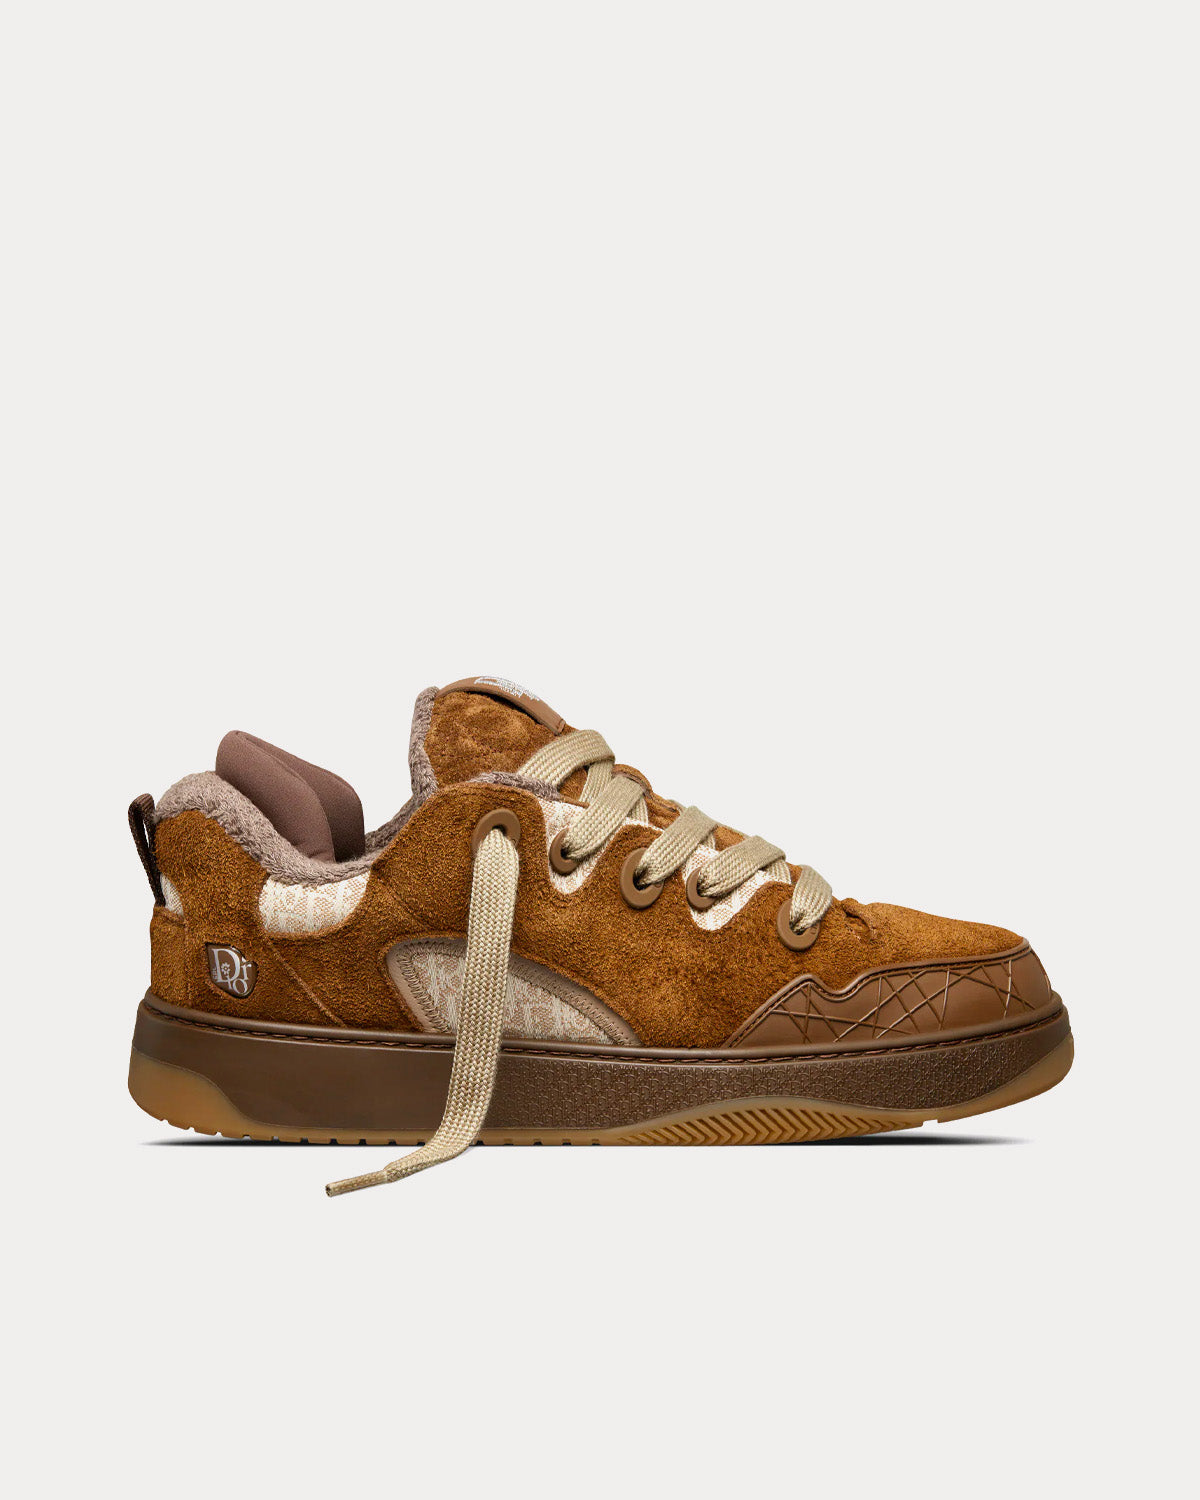 Dior x ERL - B9S Skater Limited And Numbered Edition Brown Suede with Brown and Beige Dior Oblique Jacquard Low Top Sneakers